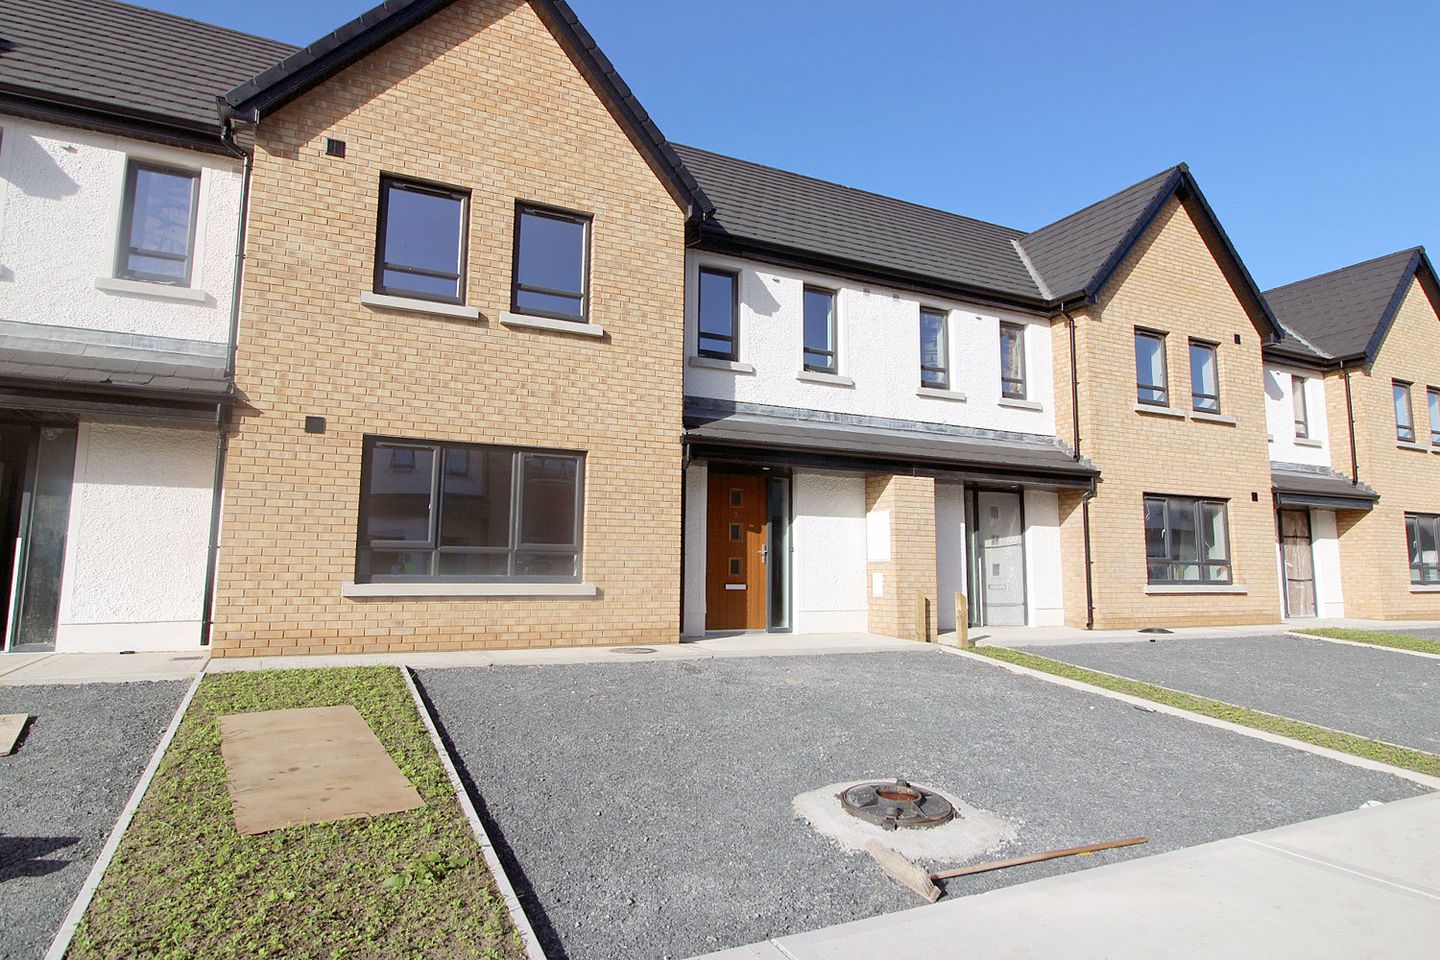 Type 1, Medebawn Court, Medebawn Court, Avenue Road, Dundalk, Co. Louth